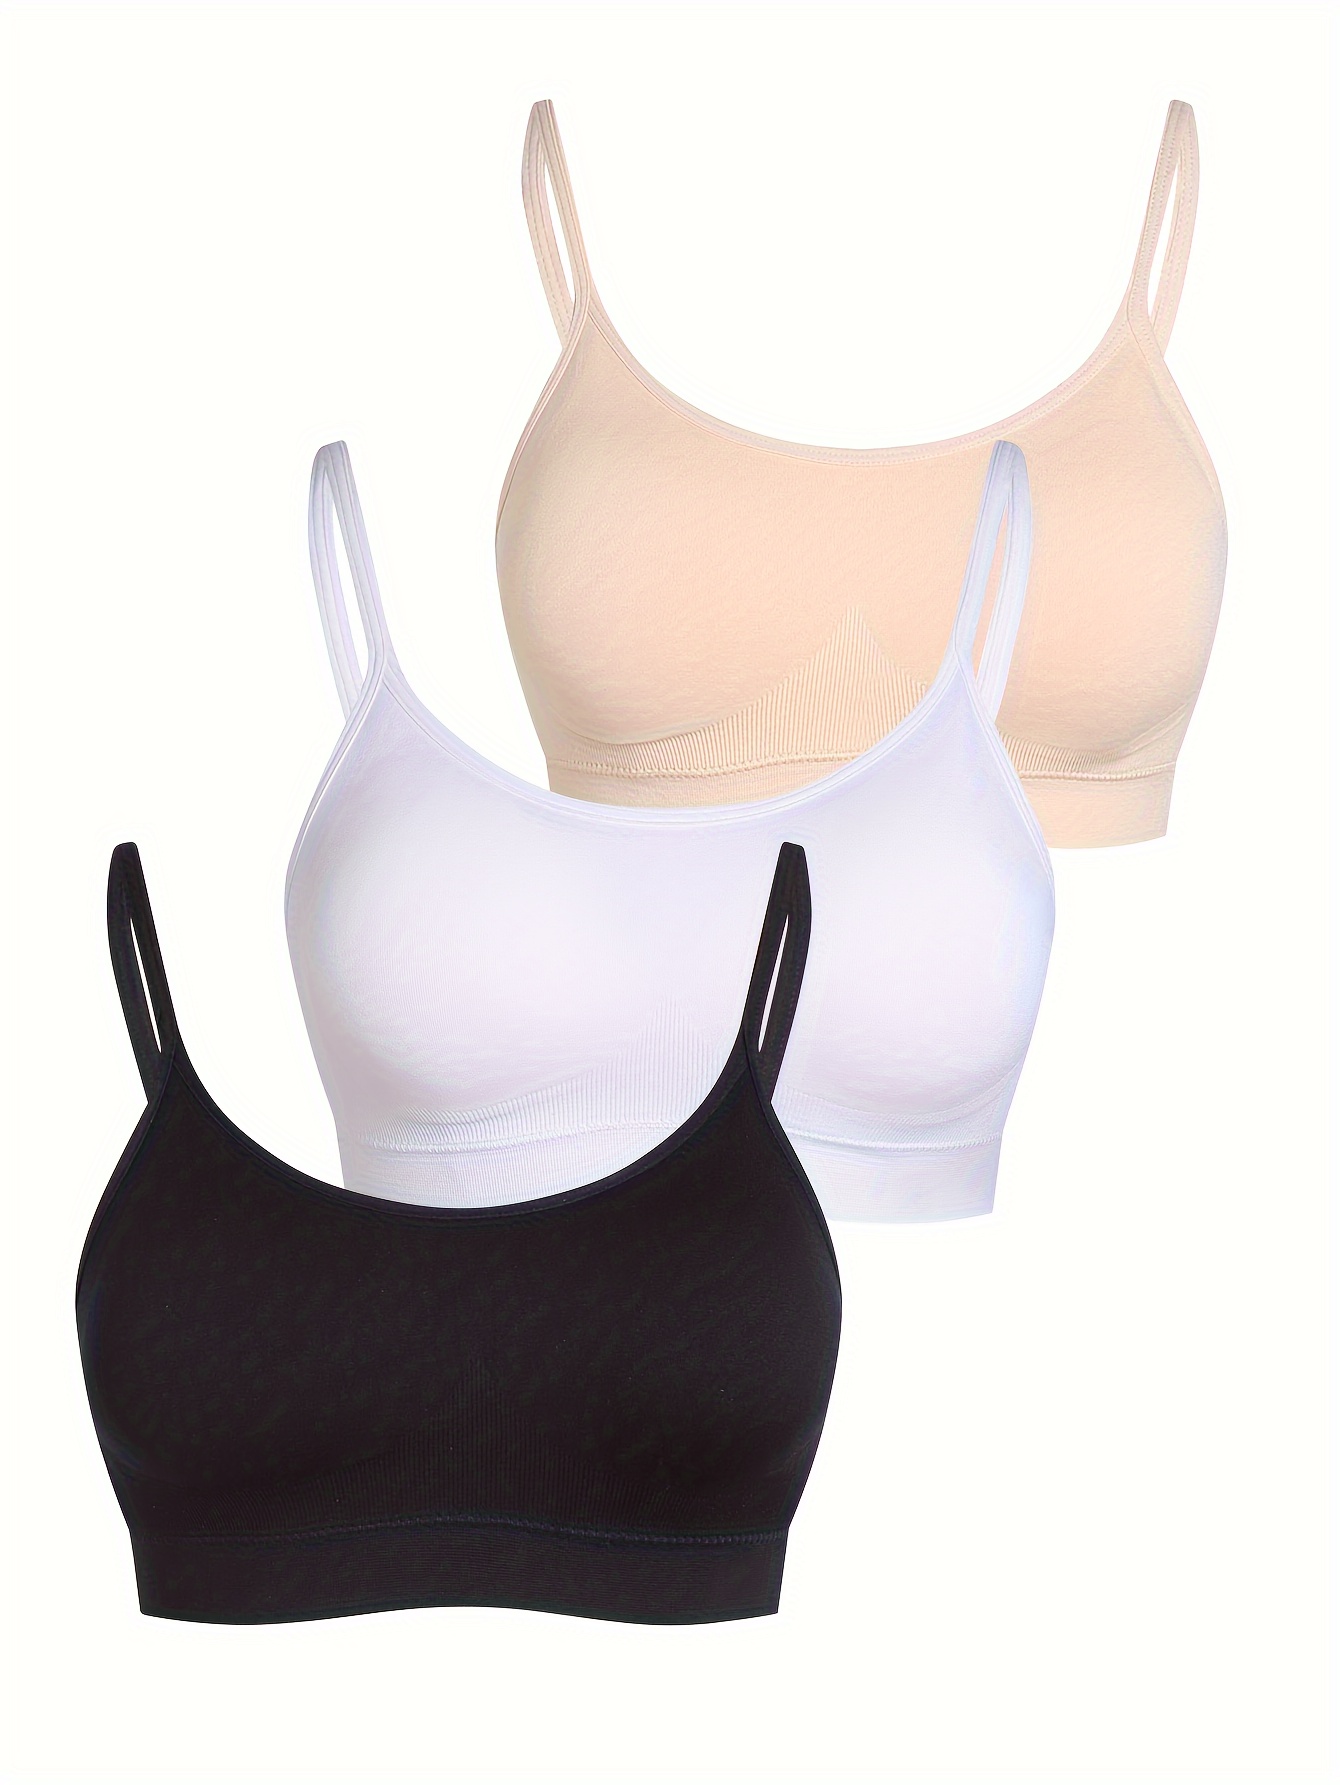 HAOAN Womens 3 Pack - Wireless Bra for Women Solid Color Seamless Bra Womens  Sports Bras Yoga Comfort Seamless Stretchy Sports Bra 